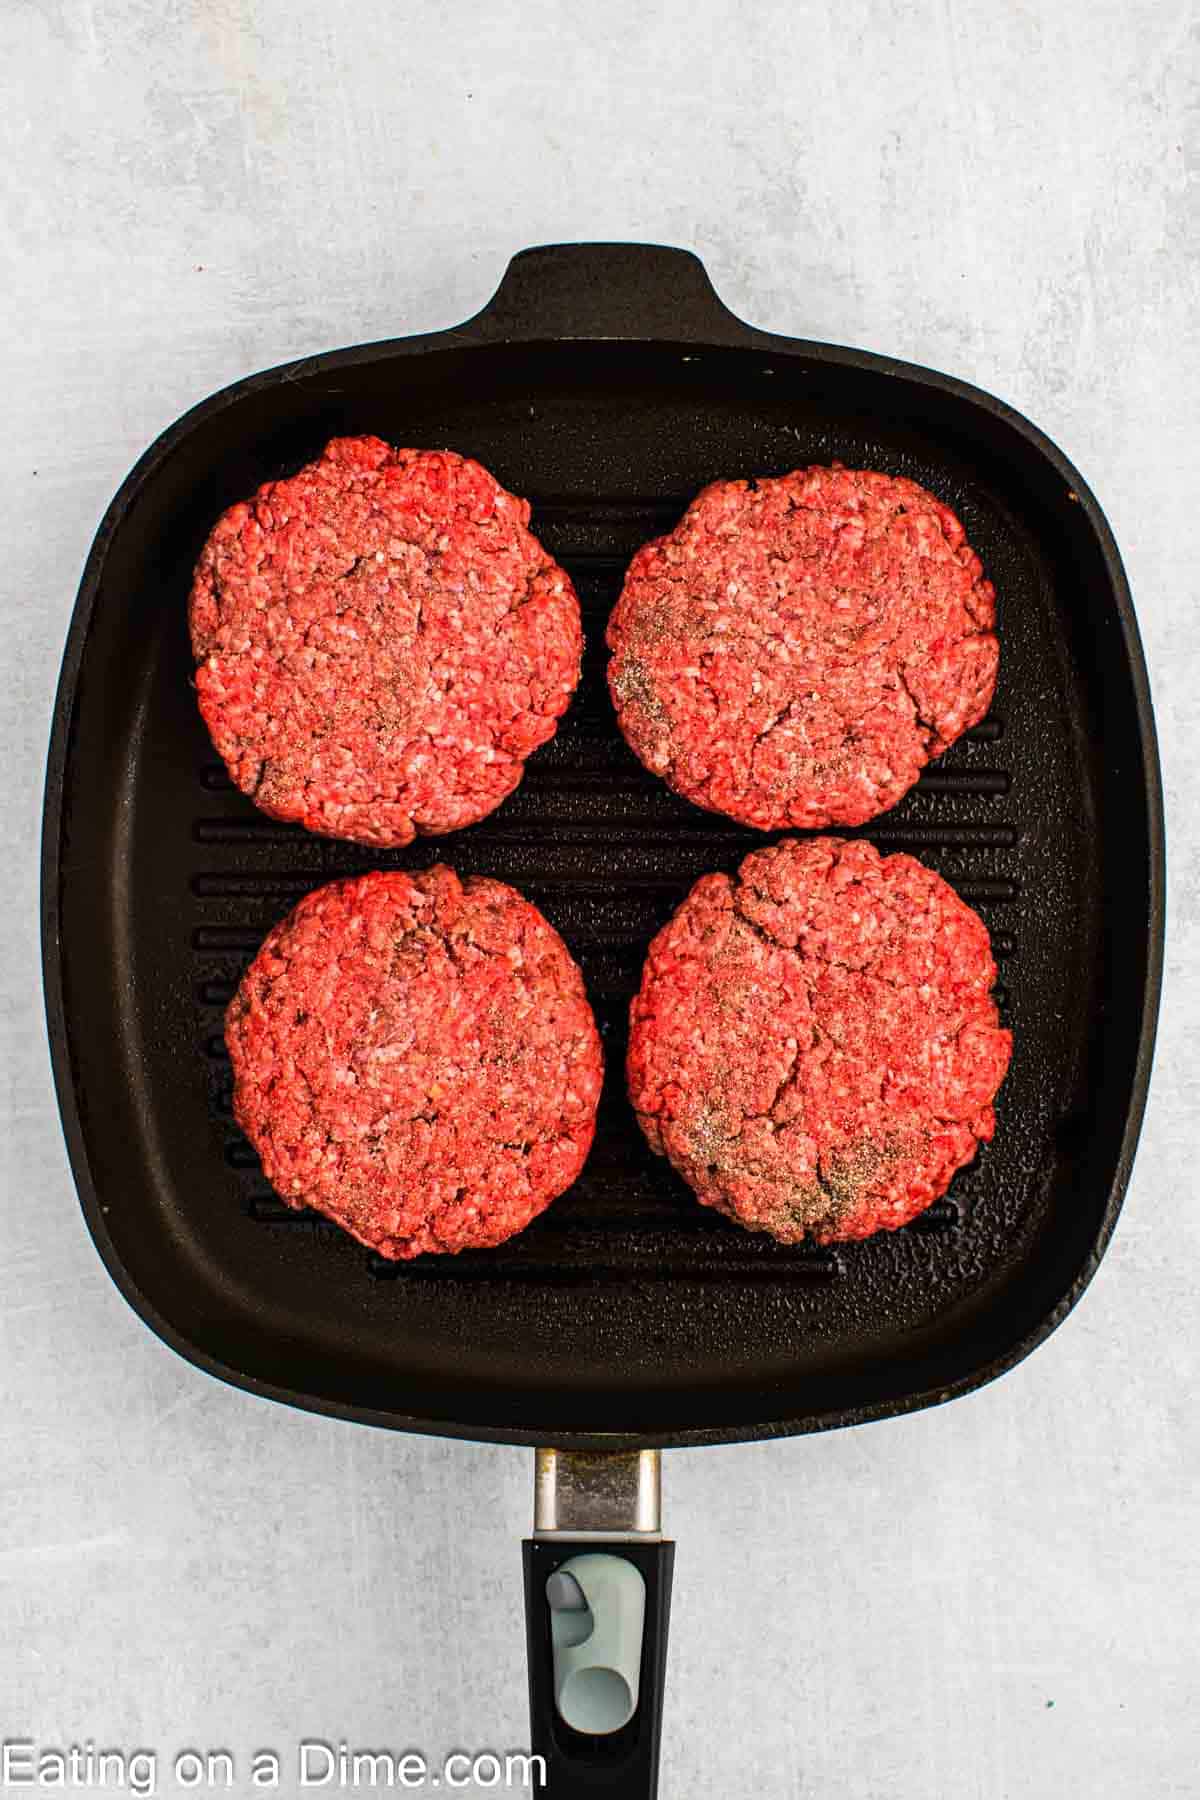 Placing the ground beef patties in a skillet